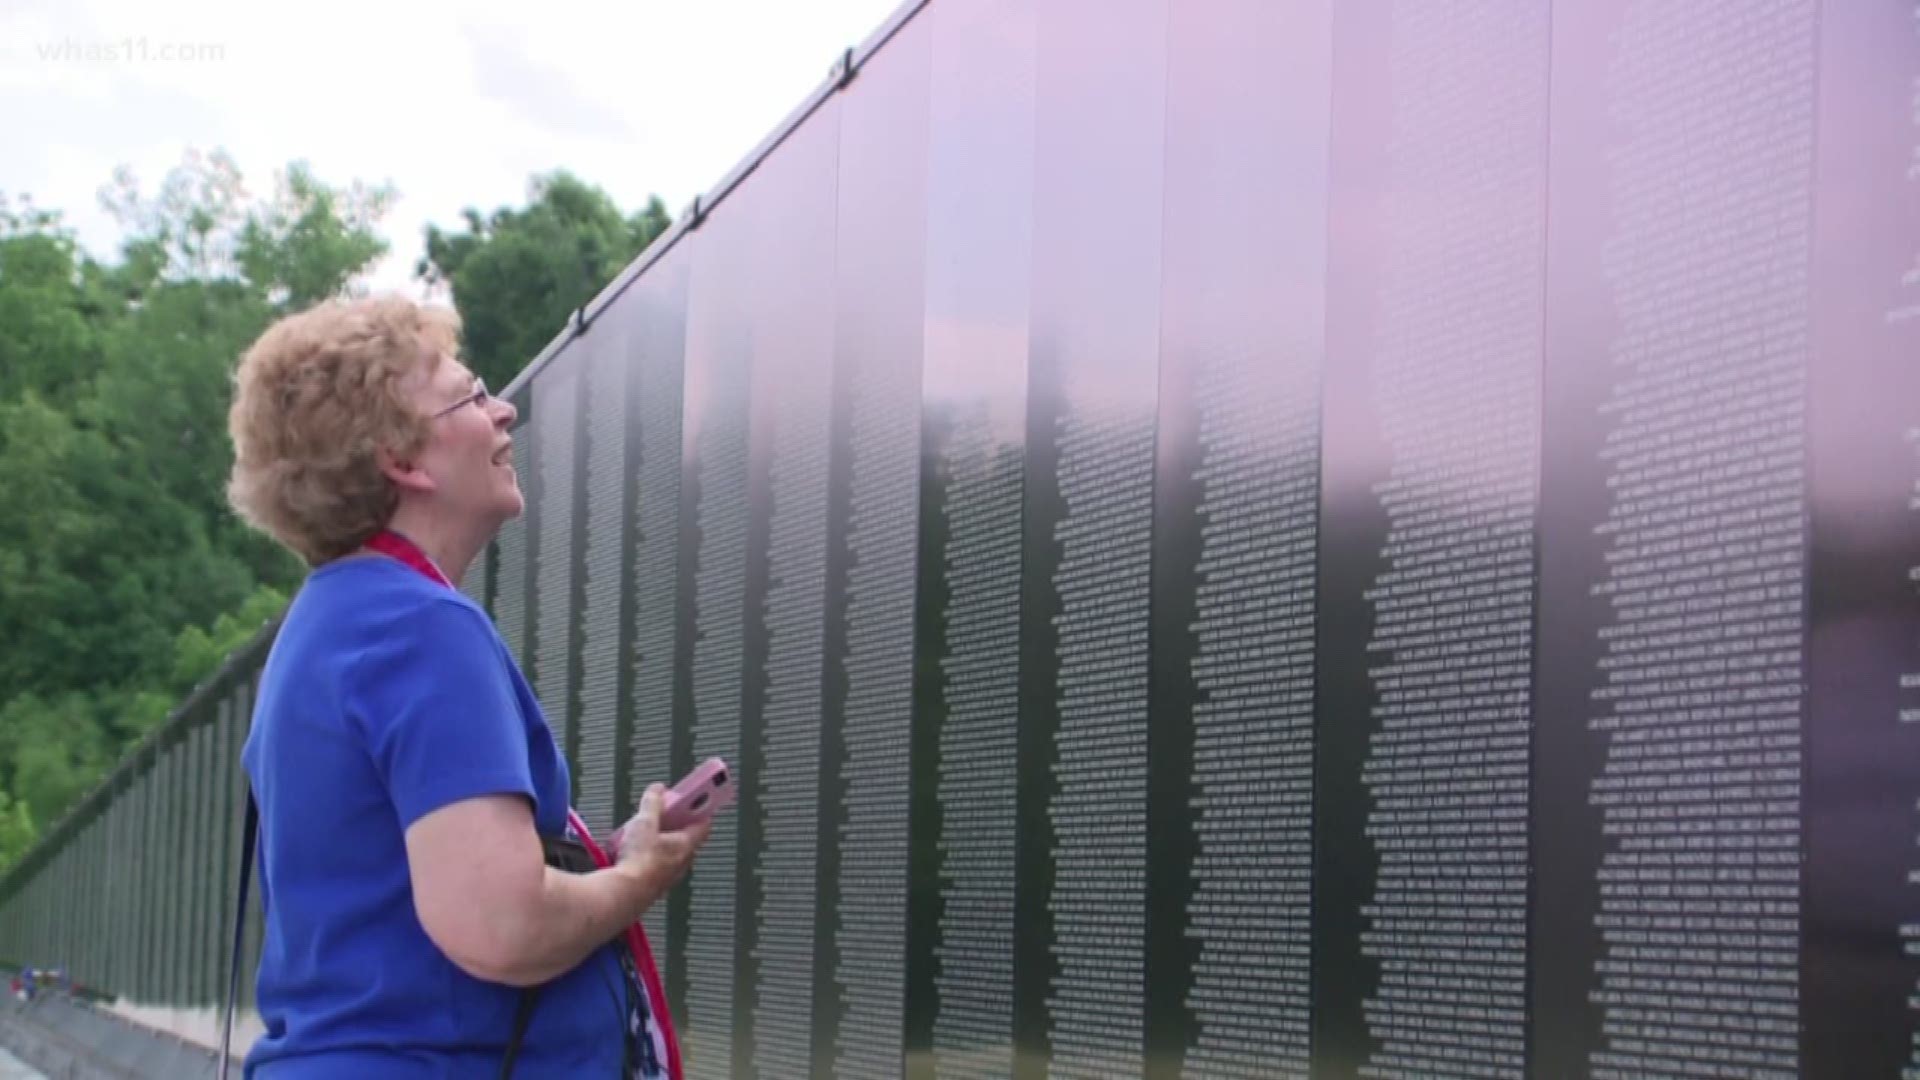 It's not just on Memorial Day when Mary Tindall remembers the sacrifices of the fallen.